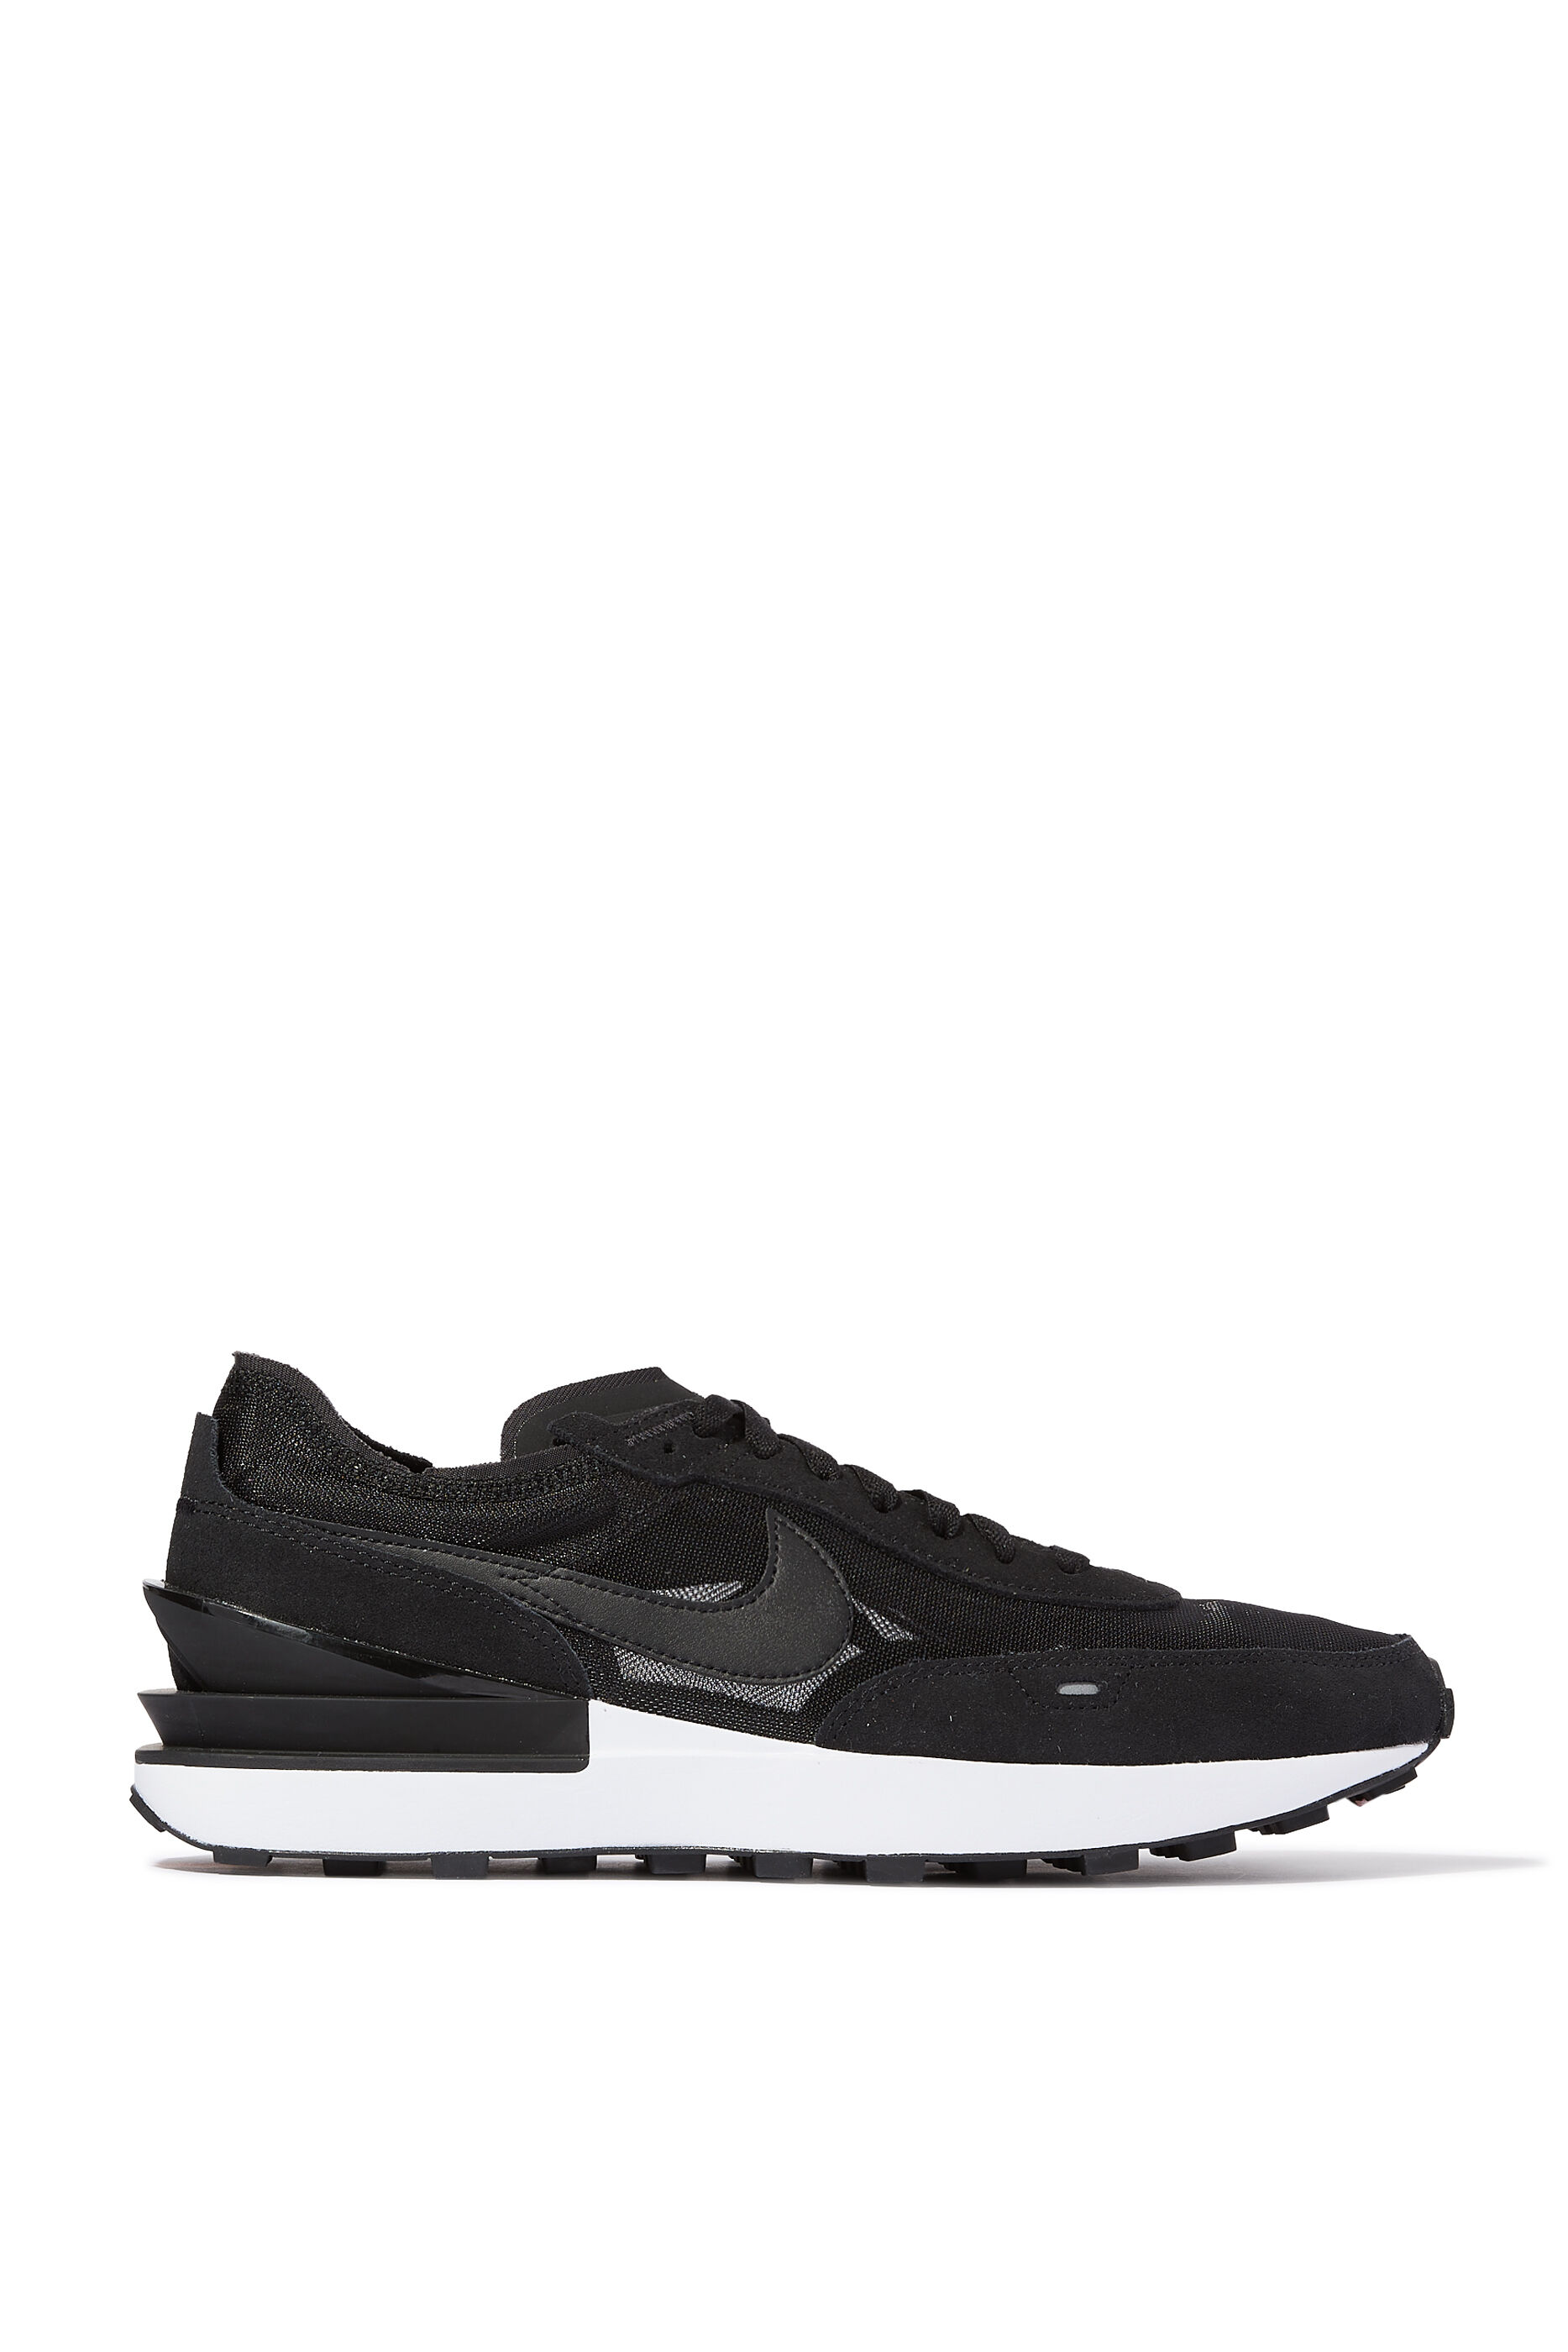 Shop Nike Collection Online | Bloomingdale's Kuwait